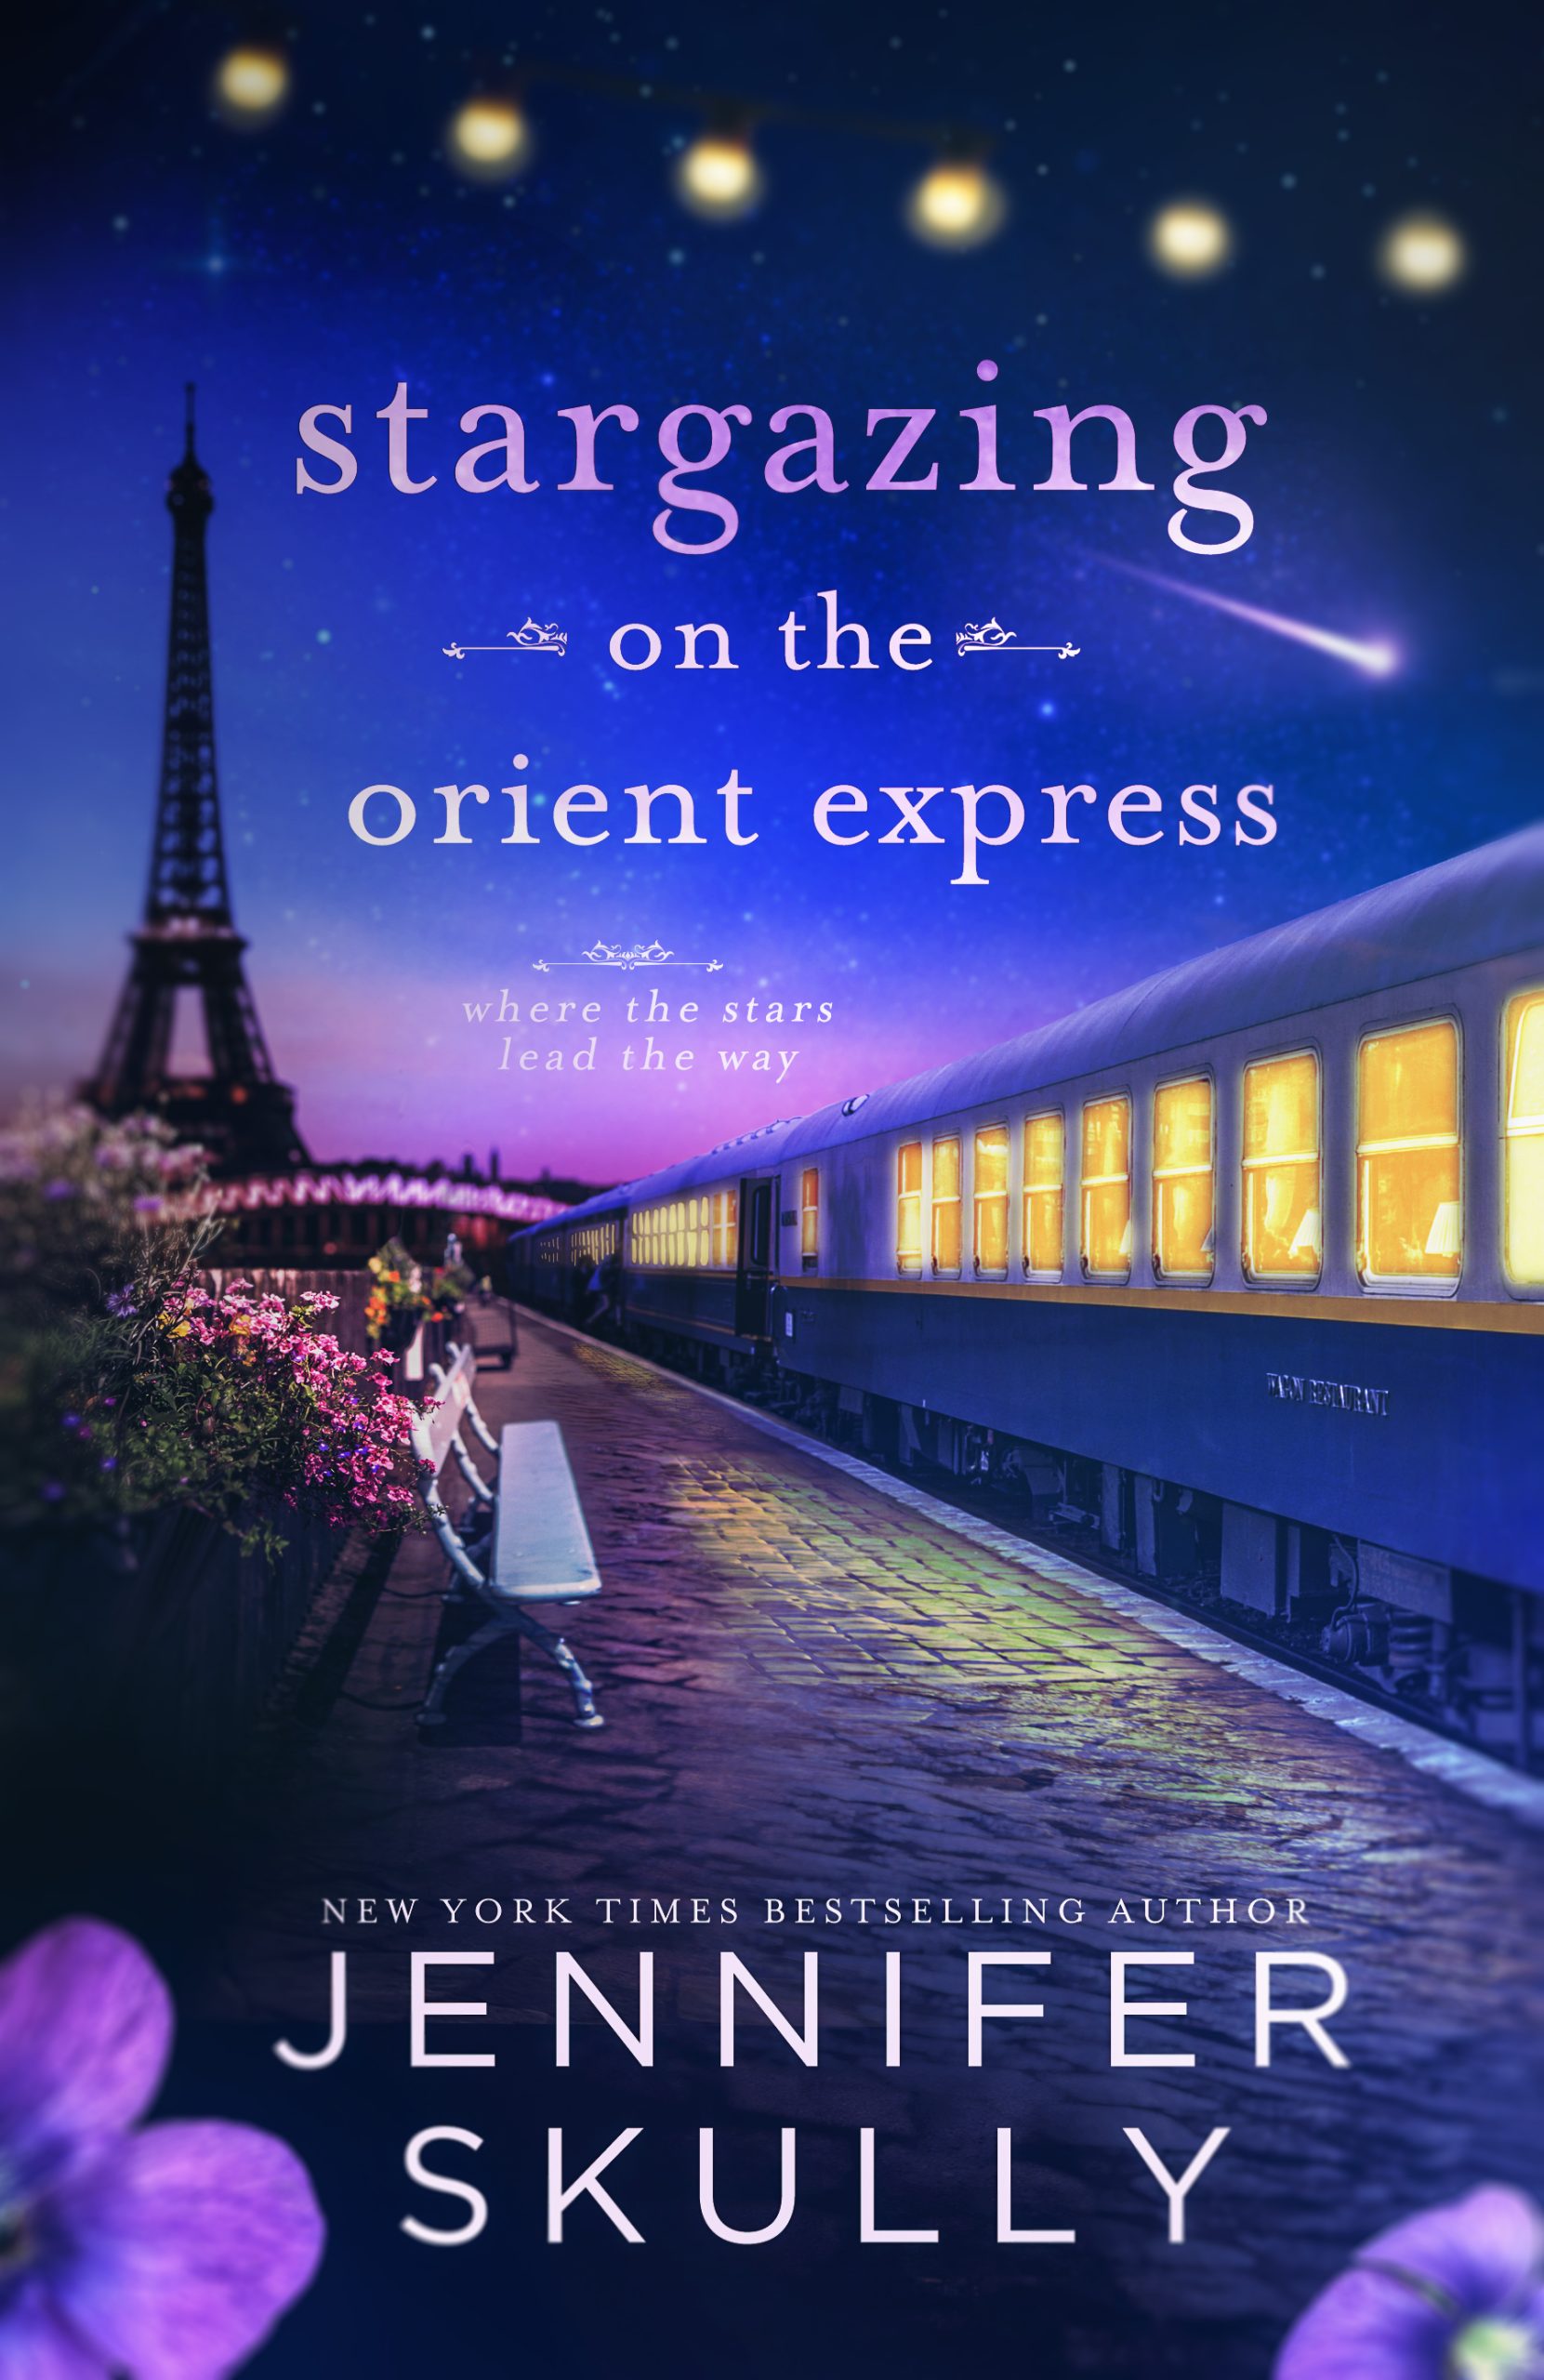 Cover of Stargazing on the Orient Express - where the stars lead the way - by New York Times Bestselling Author Jennifer Skully